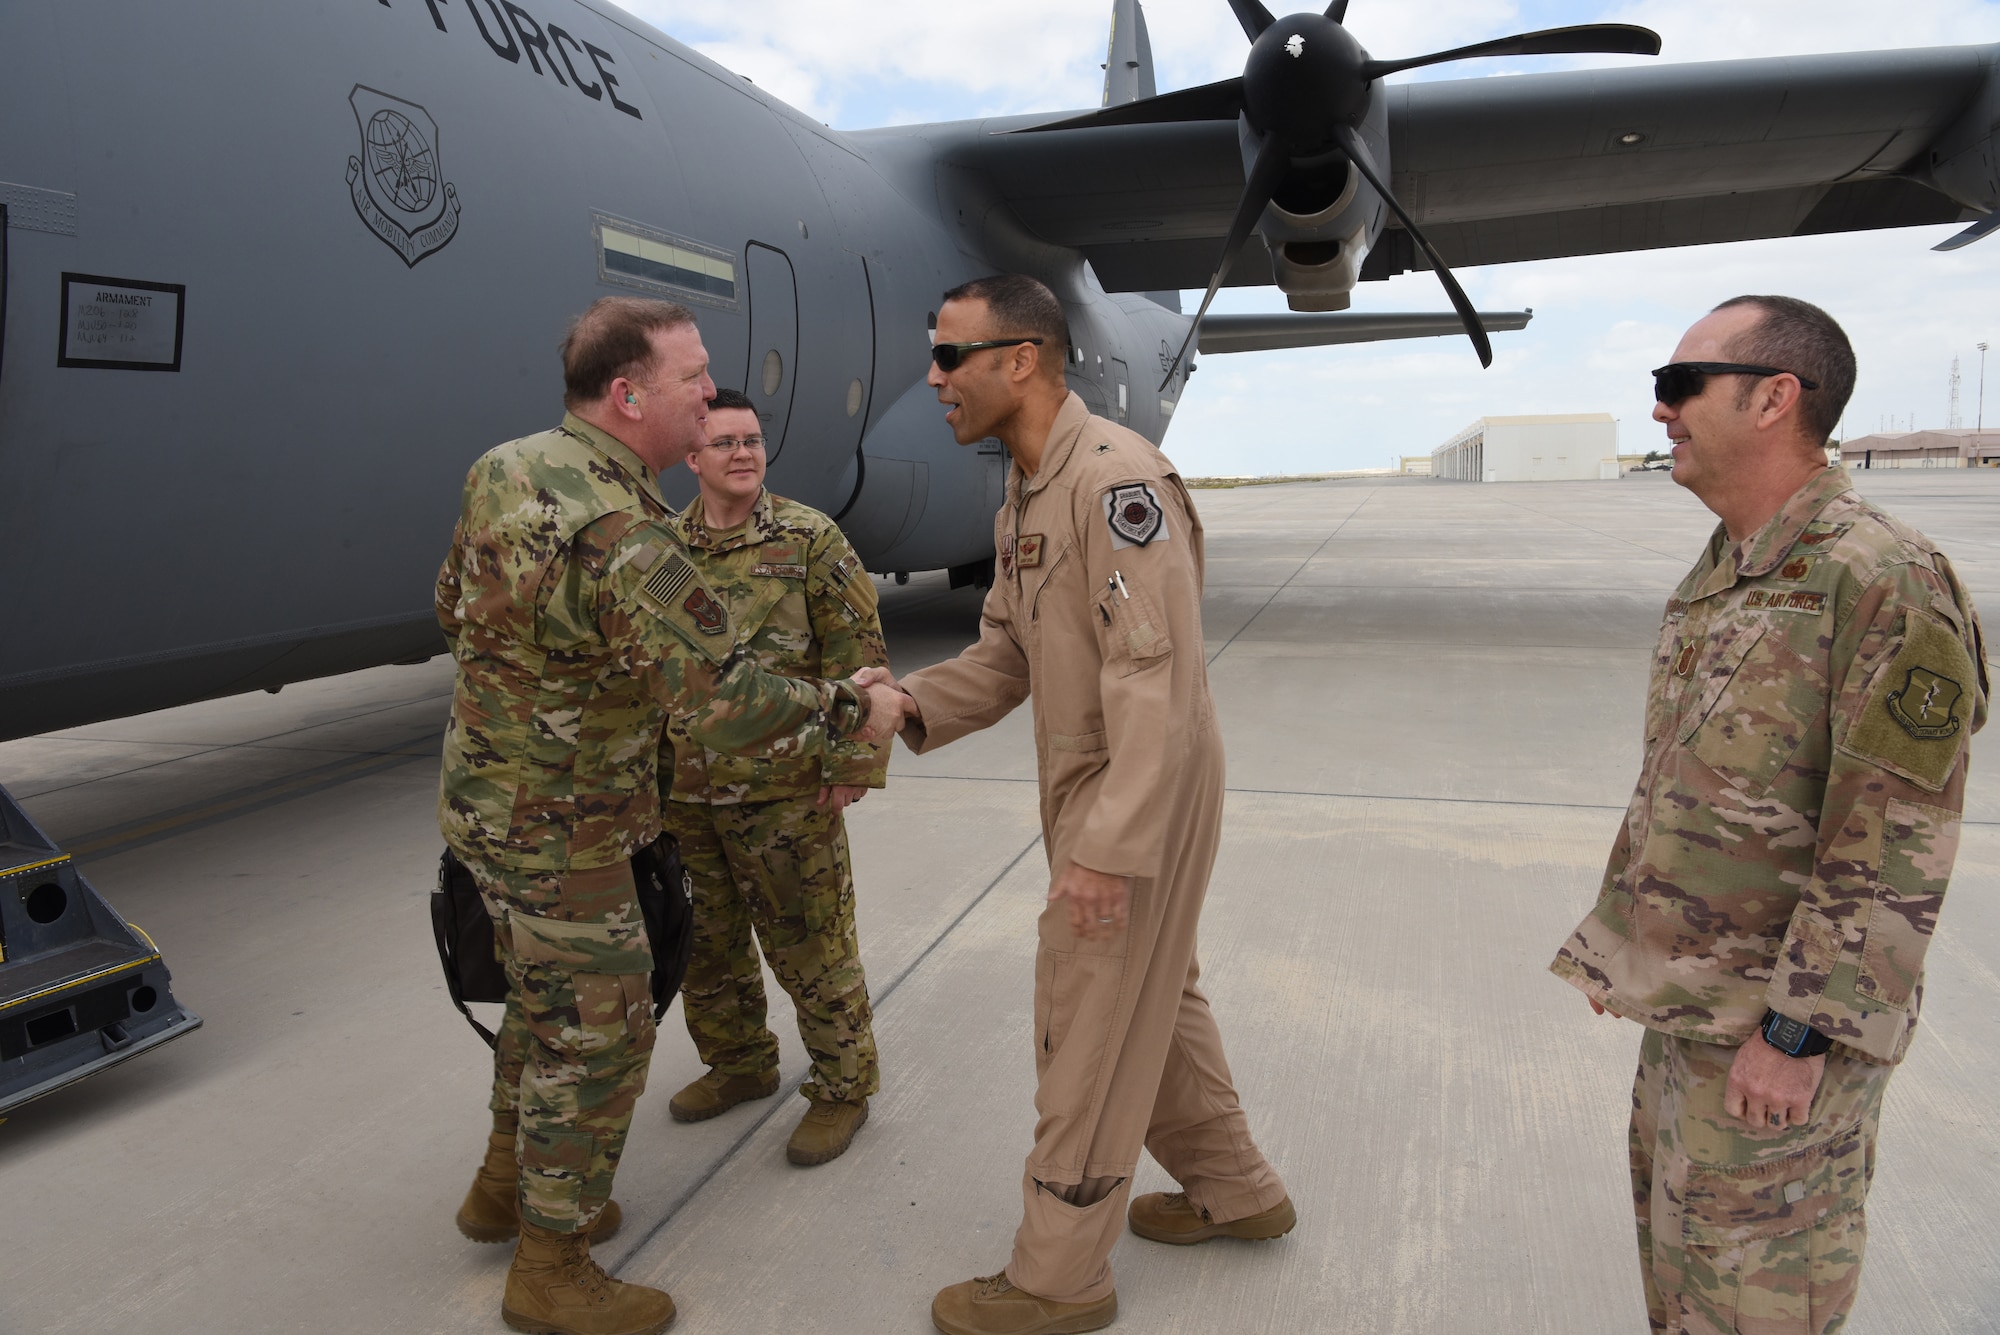 U.S. Air Force Lt. Gen. Richard Scobee, commander of Air Force Reserve Command, is greeted by Brig. Gen. Adrian Spain, 380th Air Expeditionary Wing commander, and Chief Master Sgt. Jared Sebastian, 380th AEW command chief, during his visit to Al Dhafra Air Base, United Arab Emirates, Feb. 13, 2019.